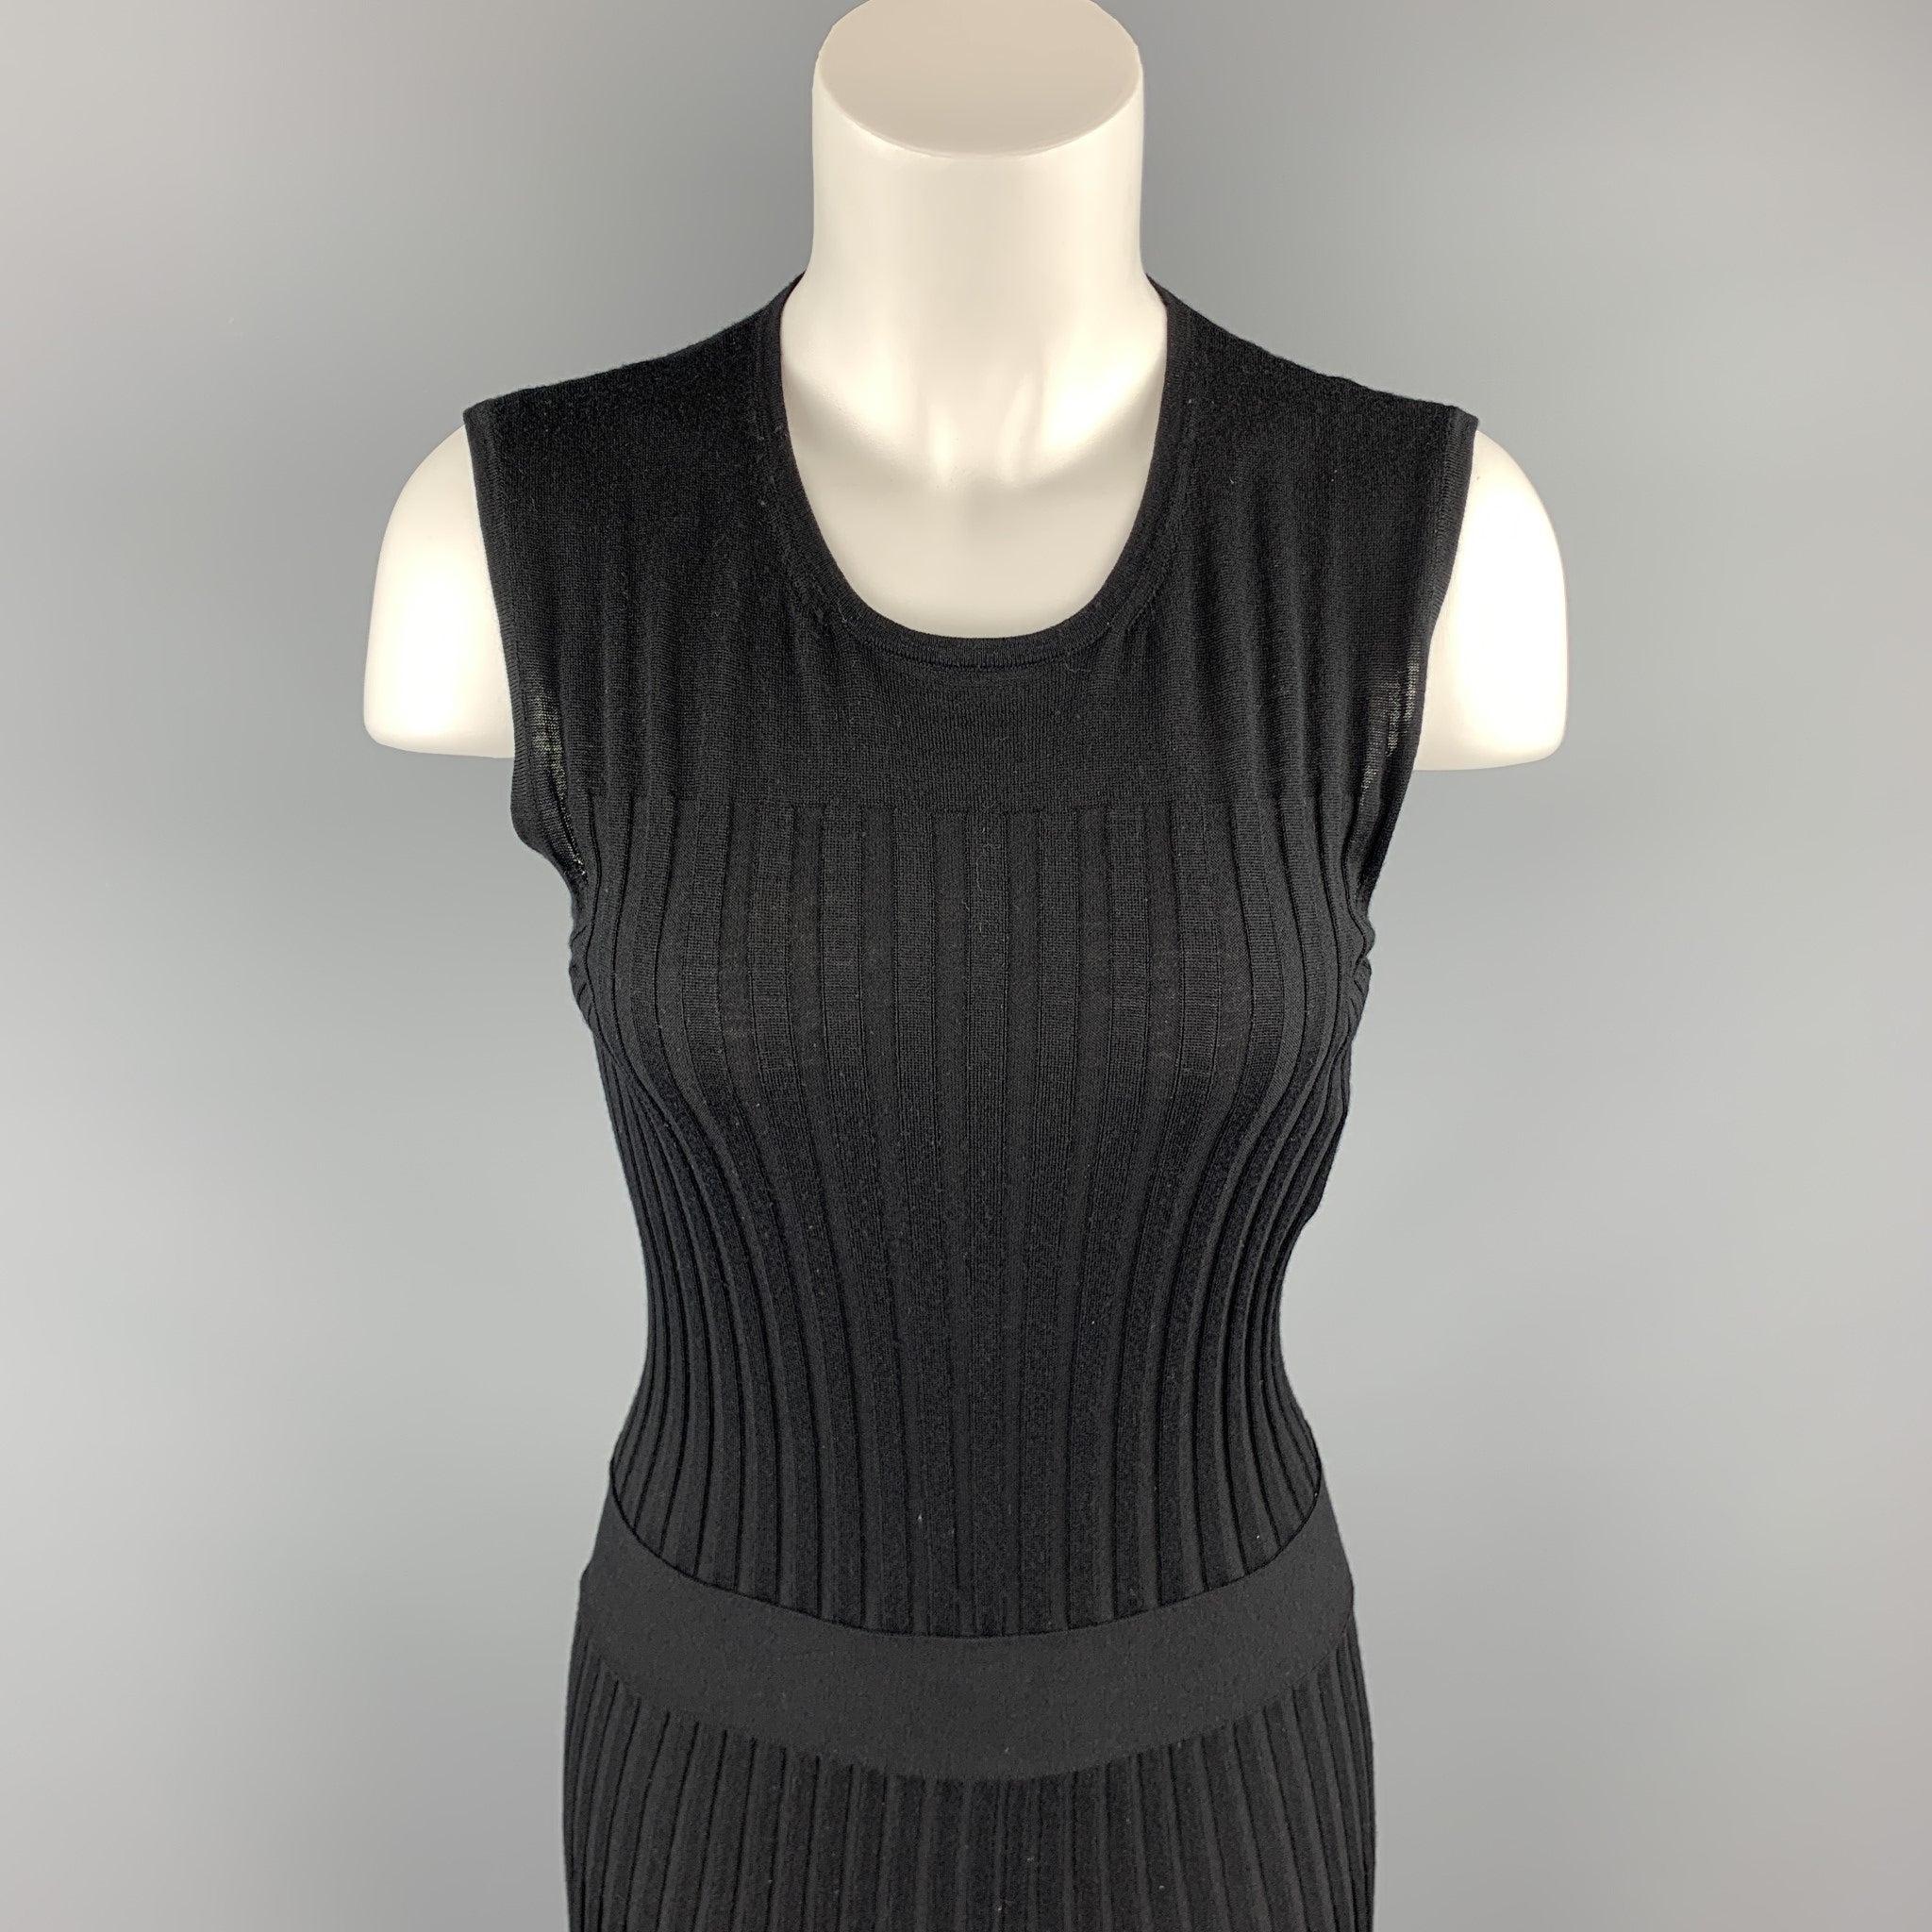 EMILIO PUCCI sleeveless dress comes in a black ribbed knit virgin wool with a fit to flair ruffled skirt and a crew-neck. Small hole. As-Is. Made in Italy.Good
Pre-Owned Condition. 

Marked:   L 

Measurements: 
 
Shoulder: 13.5 inches 
Bust: 26